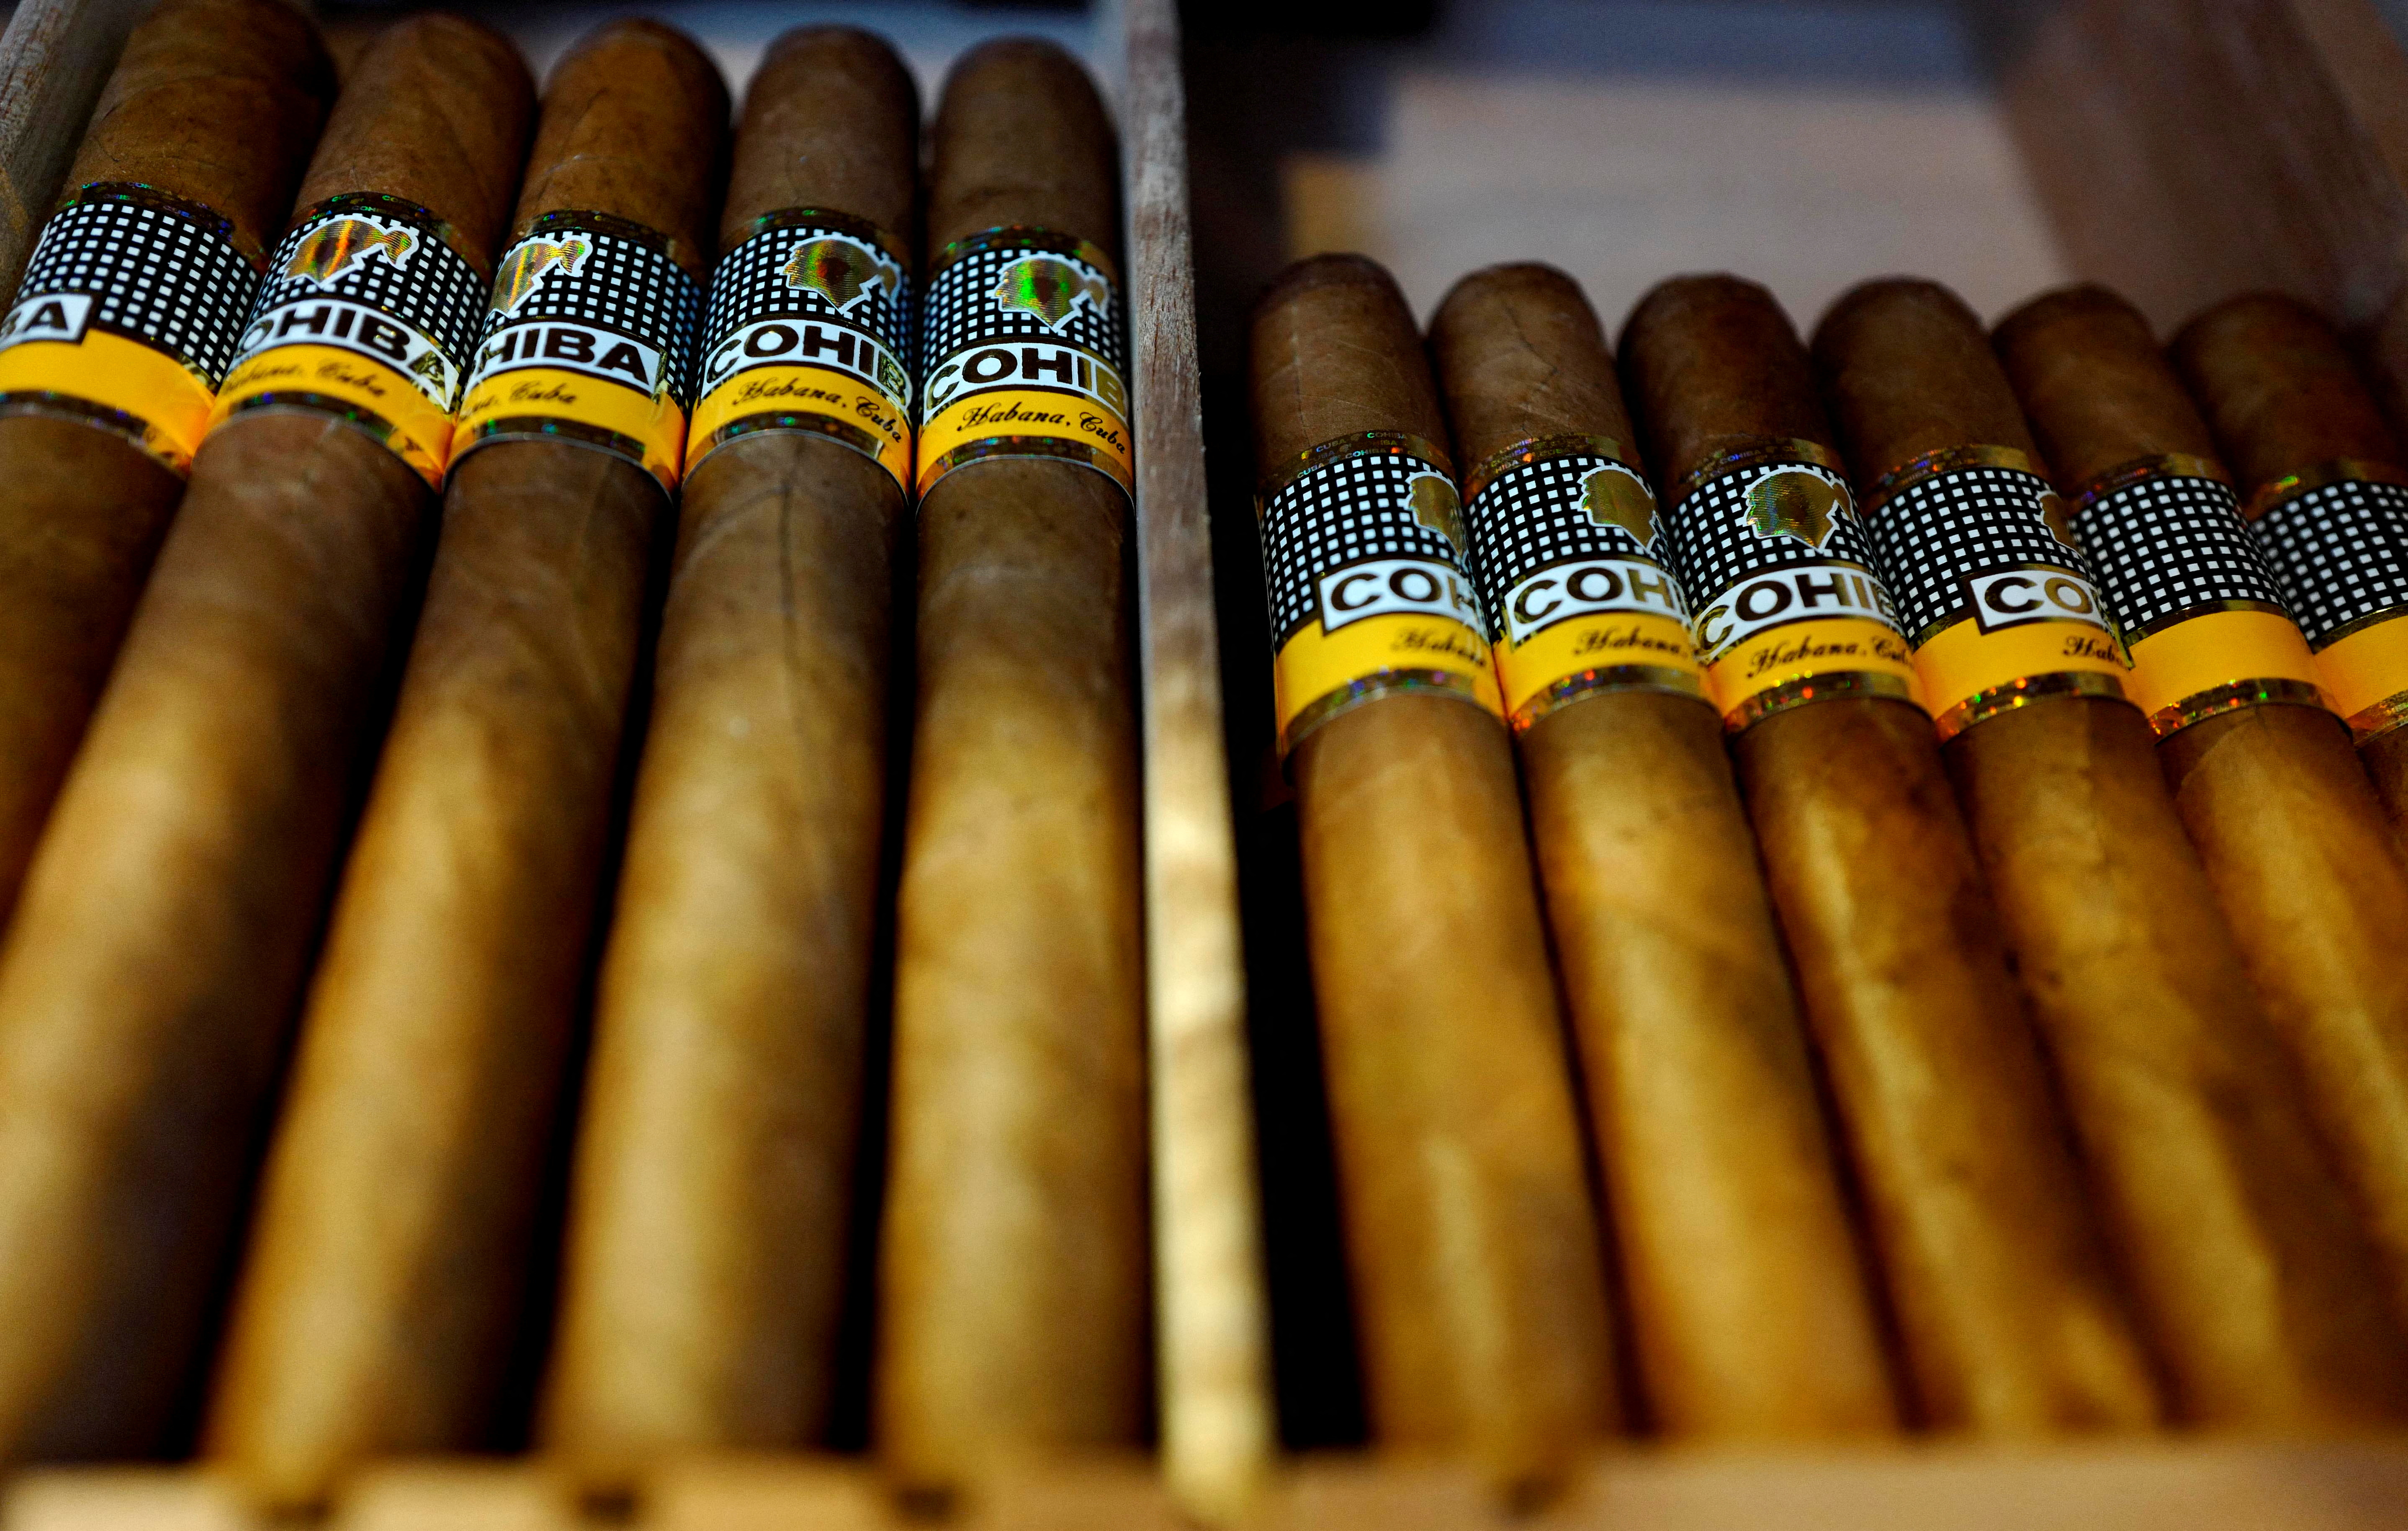 Cigars of Cuba, your online Cuban Cigar store for Habanos cigars